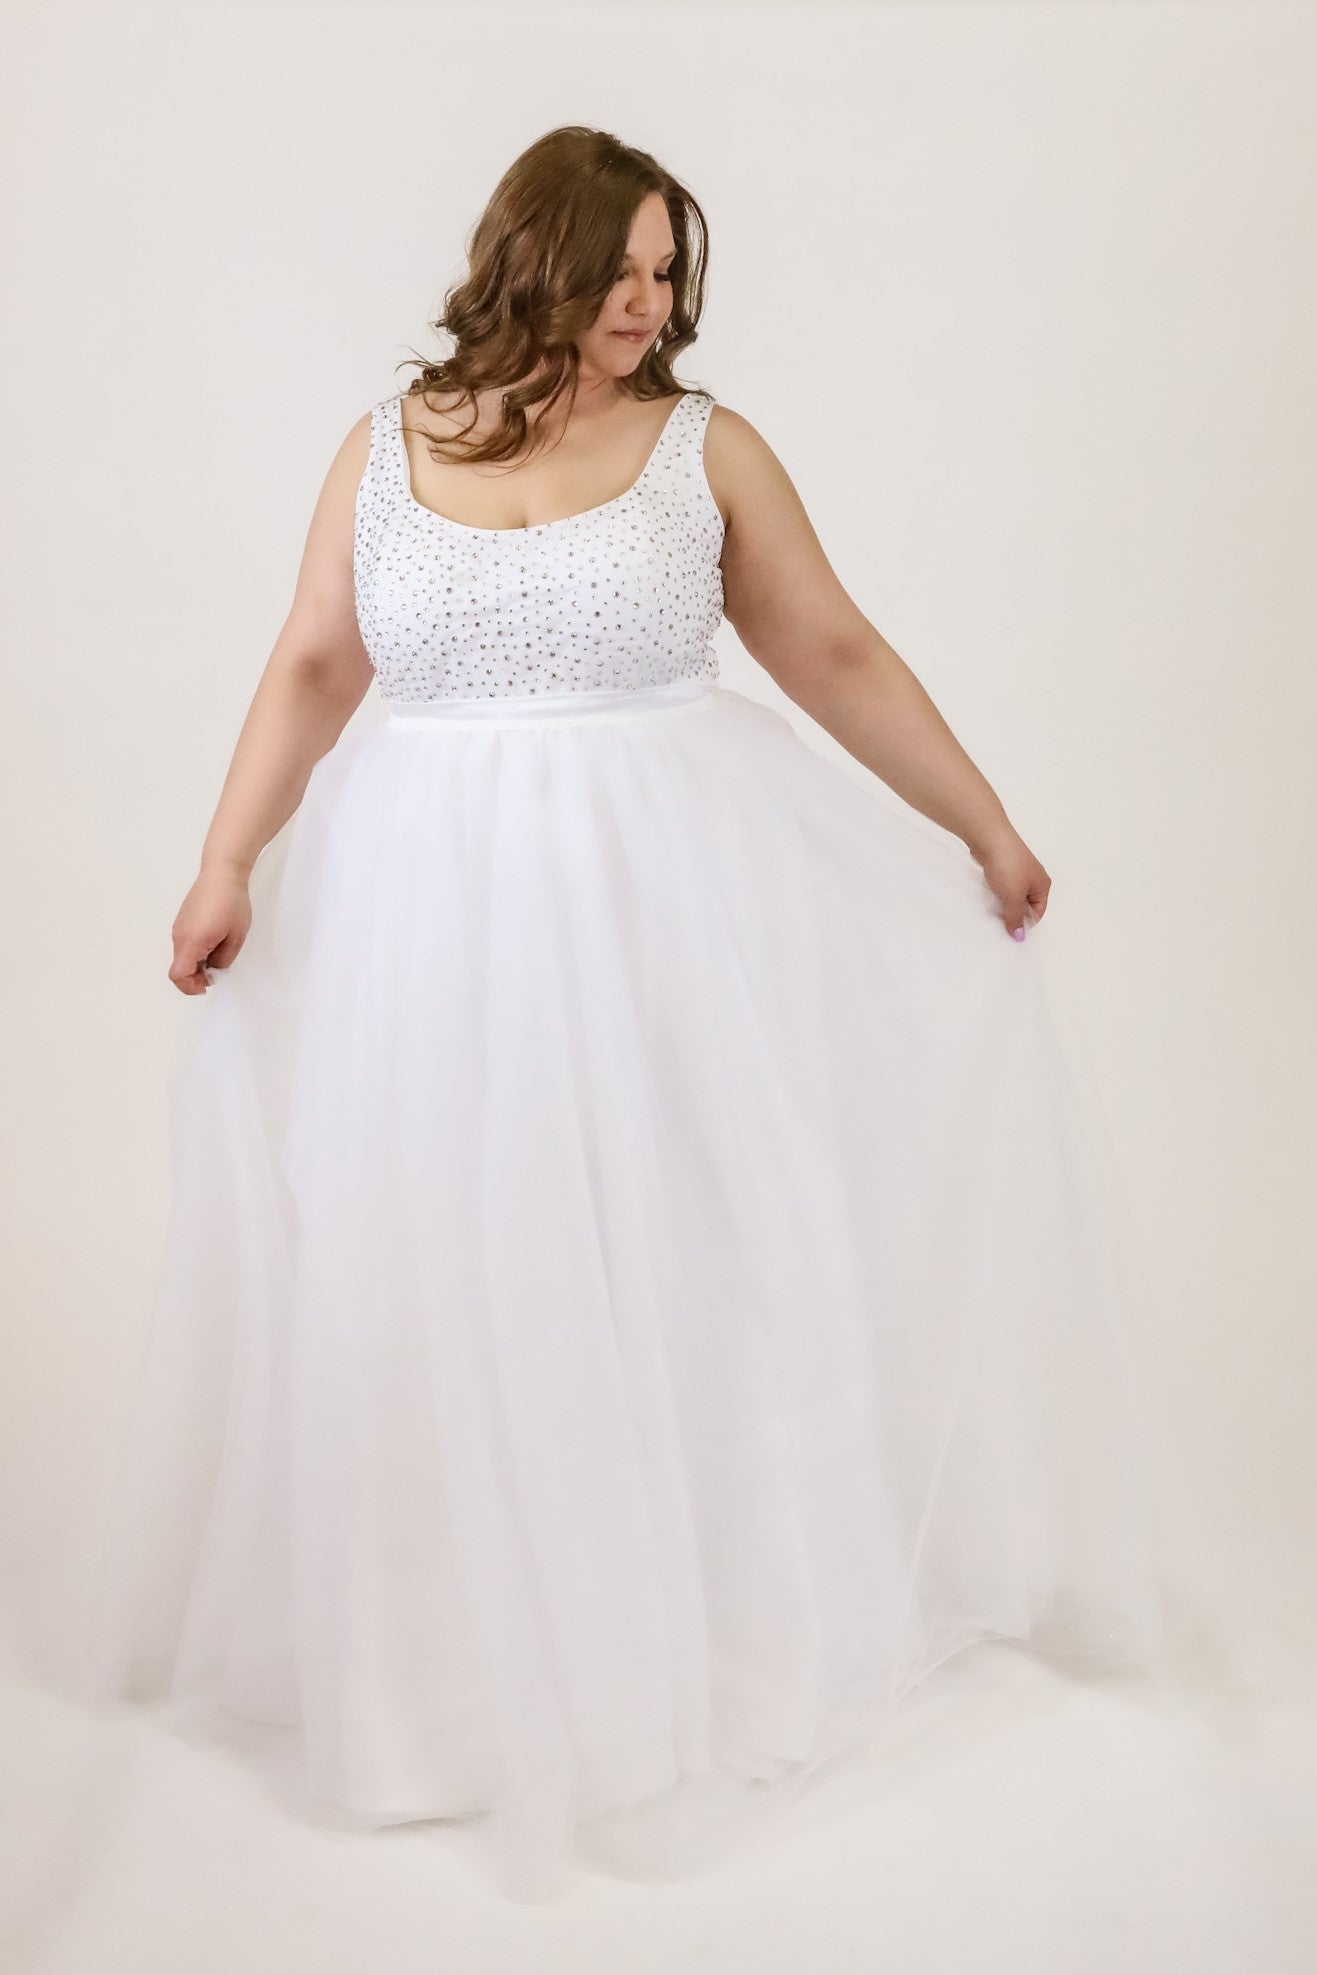 Chloe Gown with Soft Tulle Skirt